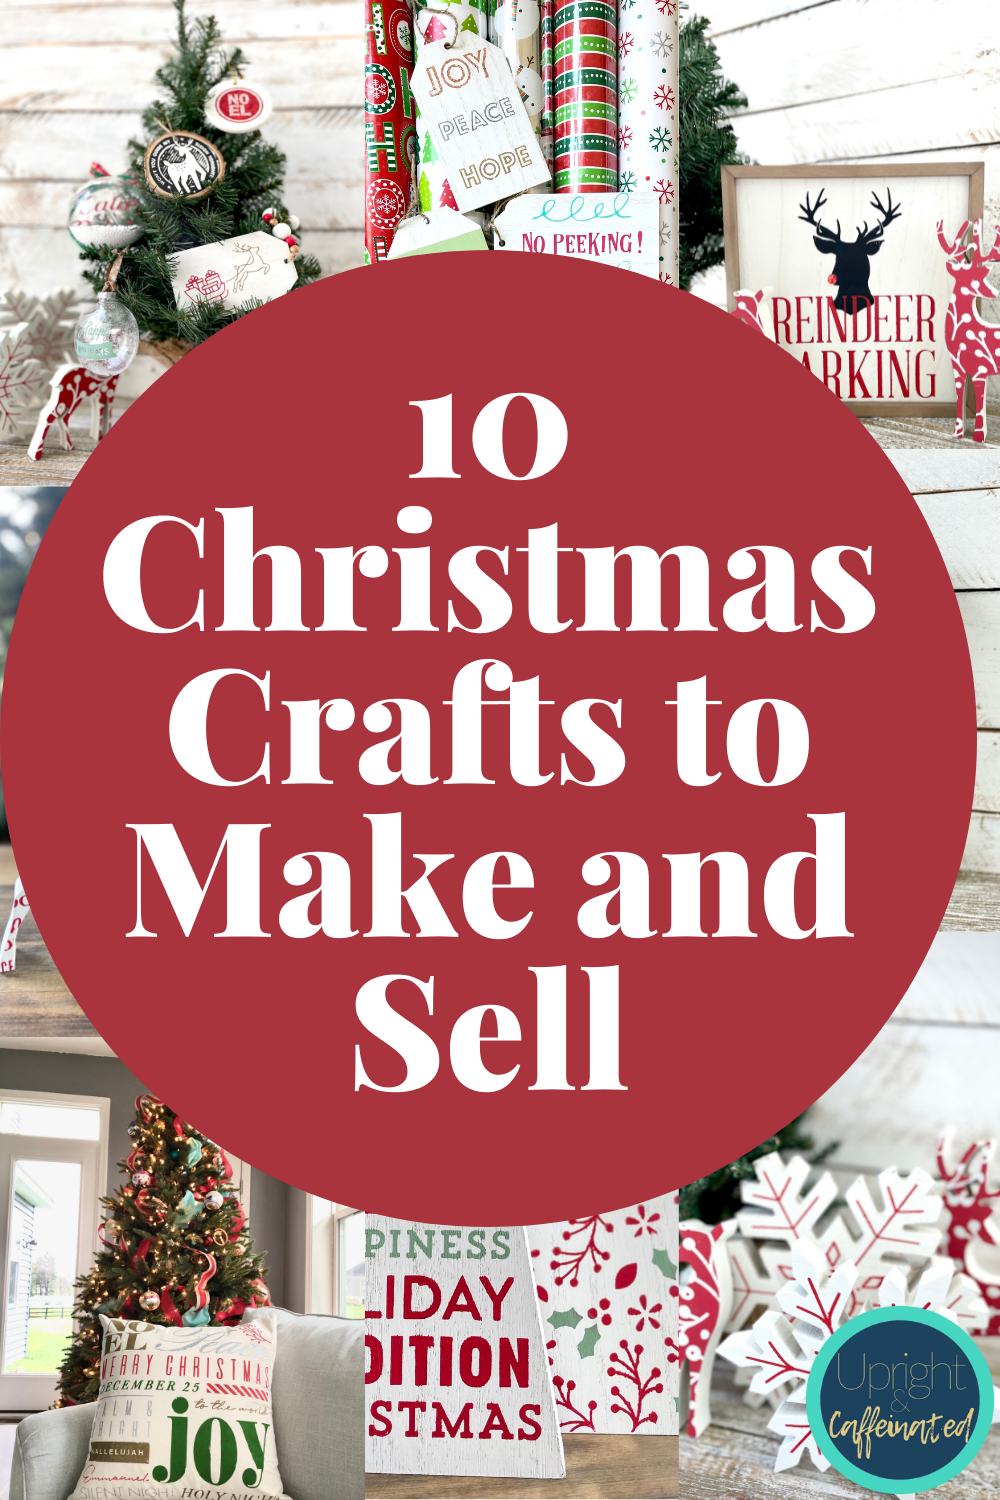 10 Christmas Crafts to Make and Sell - Upright and Caffeinated